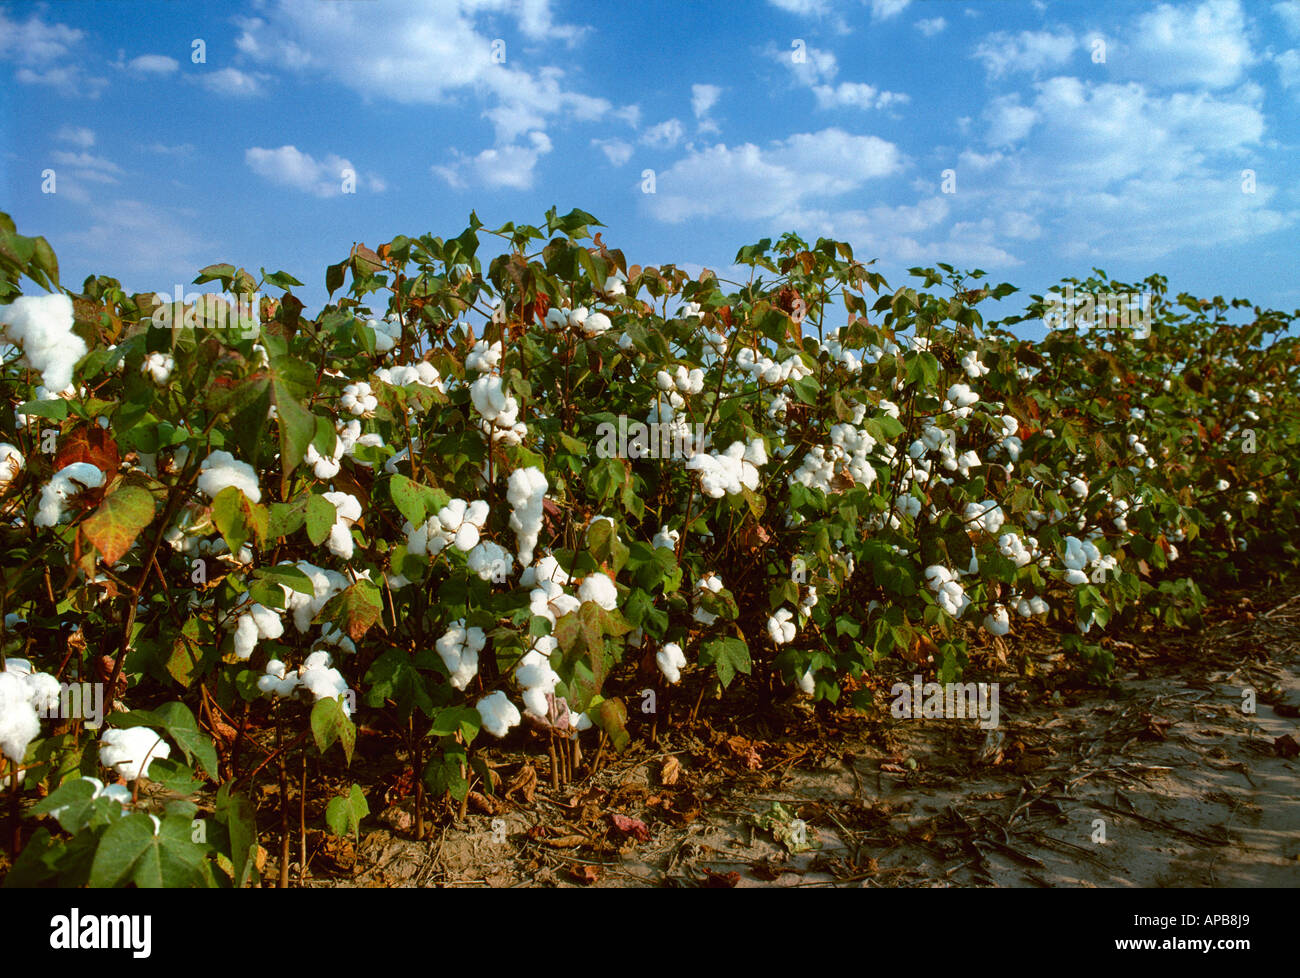 Agriculture - Mature cotton plants with open bolls ready for defoliation / Mississippi, USA. Stock Photo